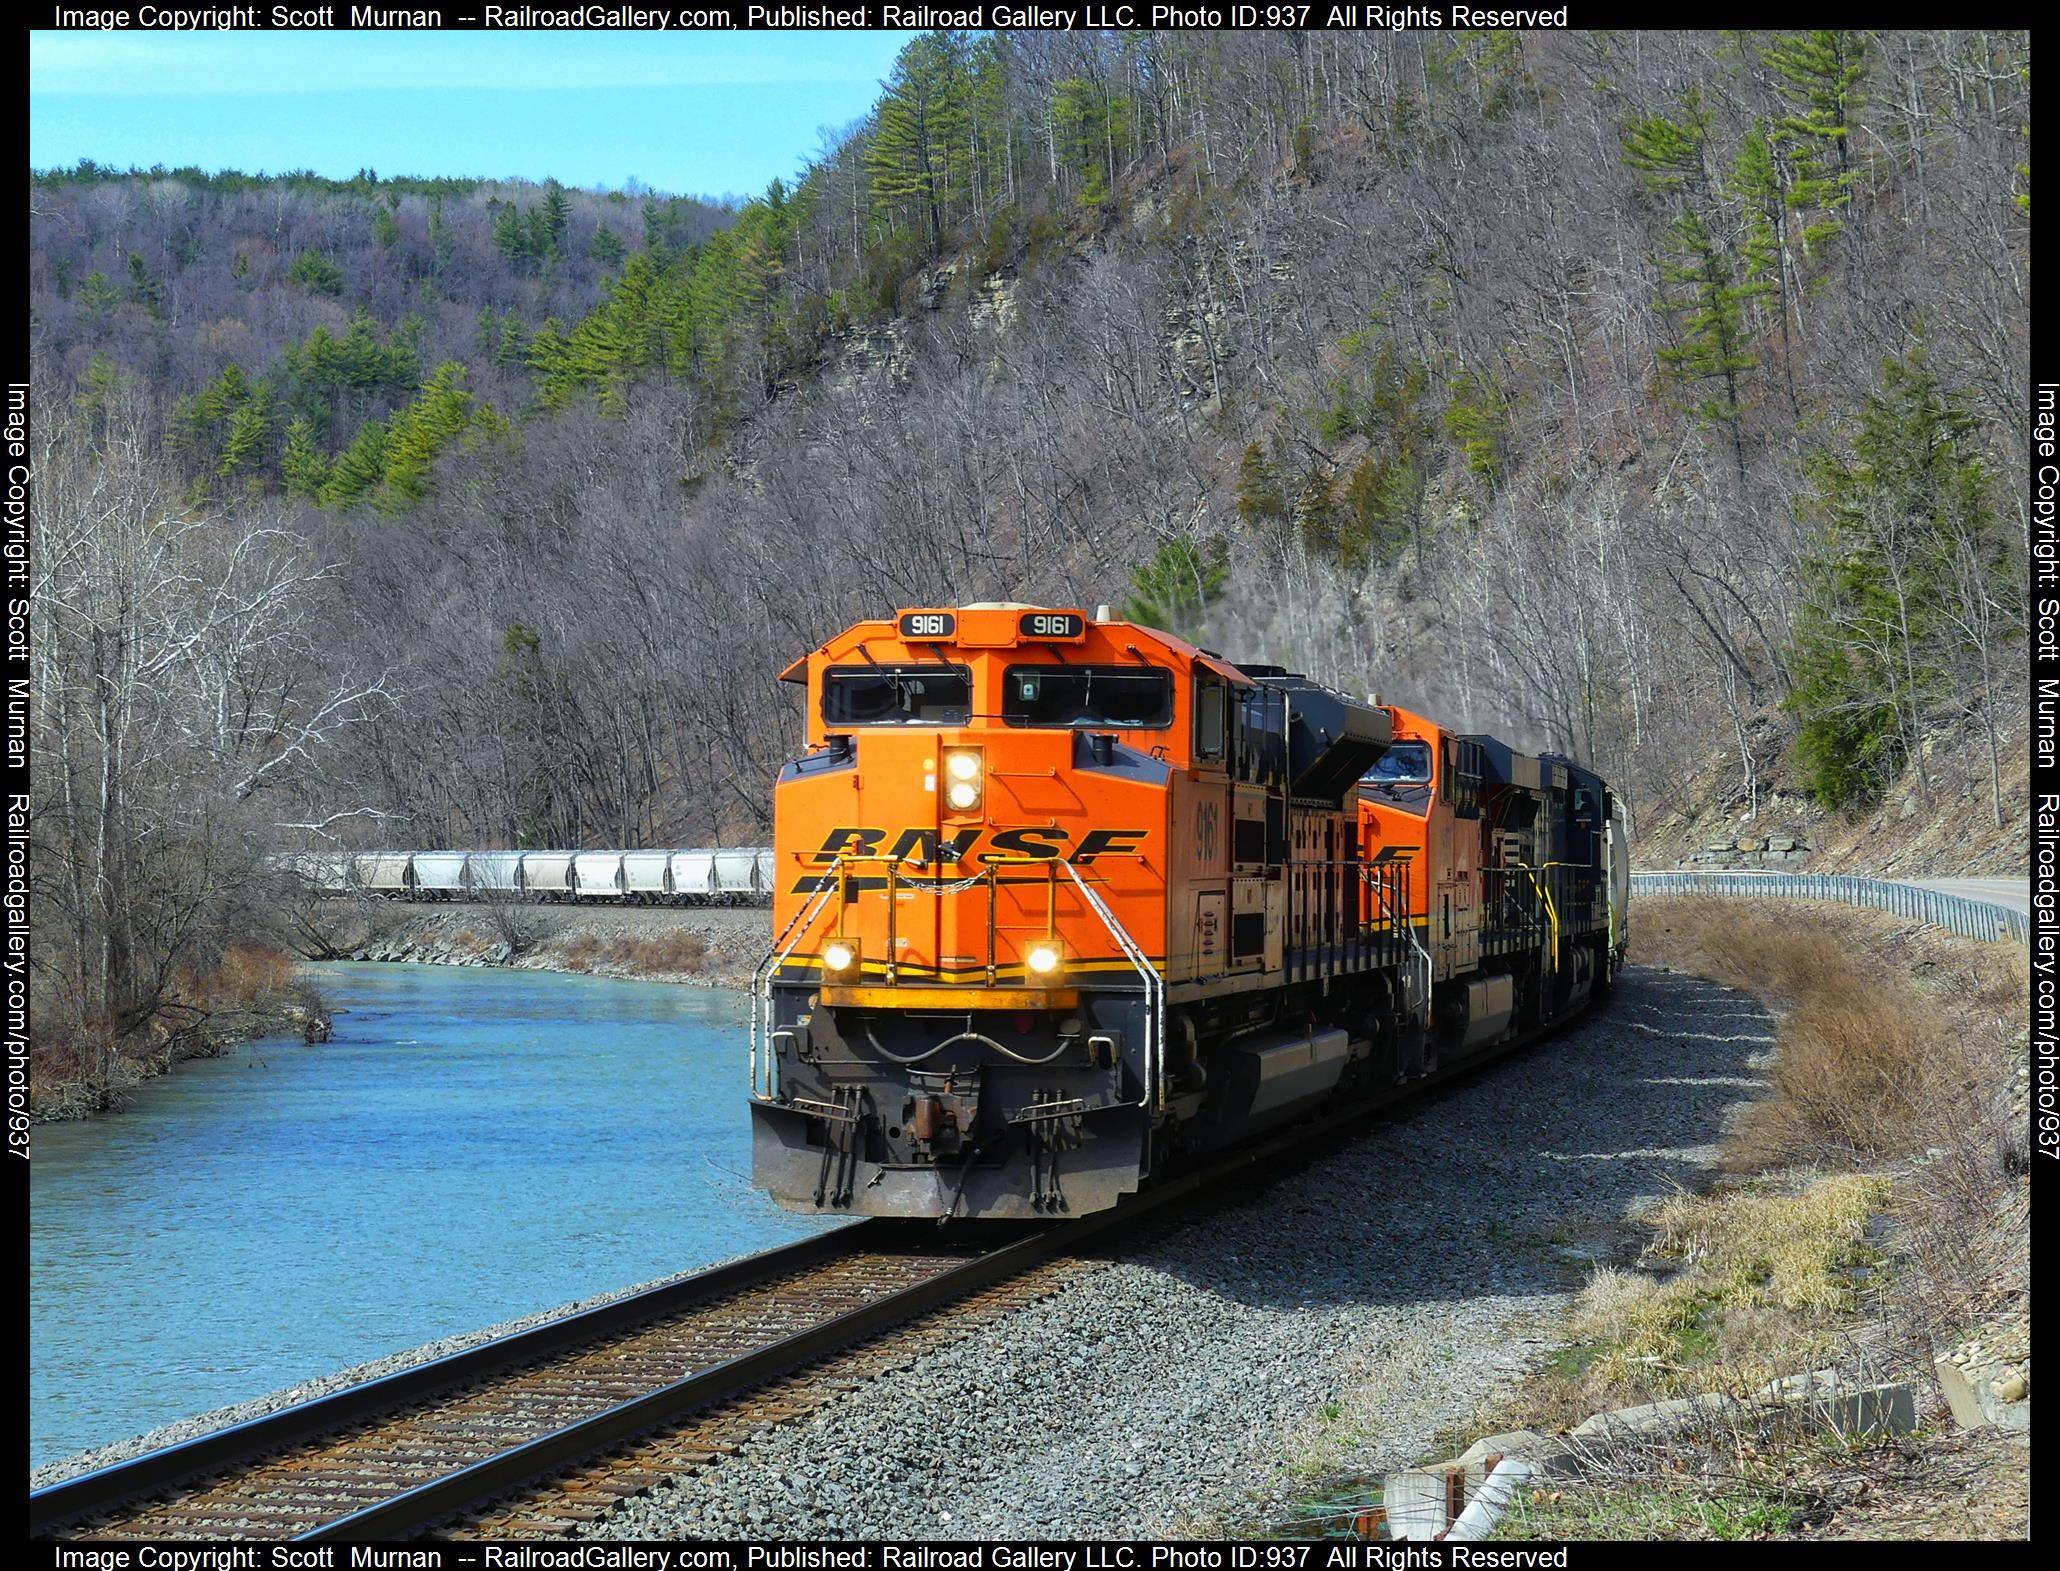 BNSF 9161 is a class EMD SD70ACe and  is pictured in Rathbone, New York, United States.  This was taken along the Southern Tier Line on the Norfolk Southern. Photo Copyright: Scott  Murnan  uploaded to Railroad Gallery on 04/09/2023. This photograph of BNSF 9161 was taken on Saturday, April 08, 2023. All Rights Reserved. 